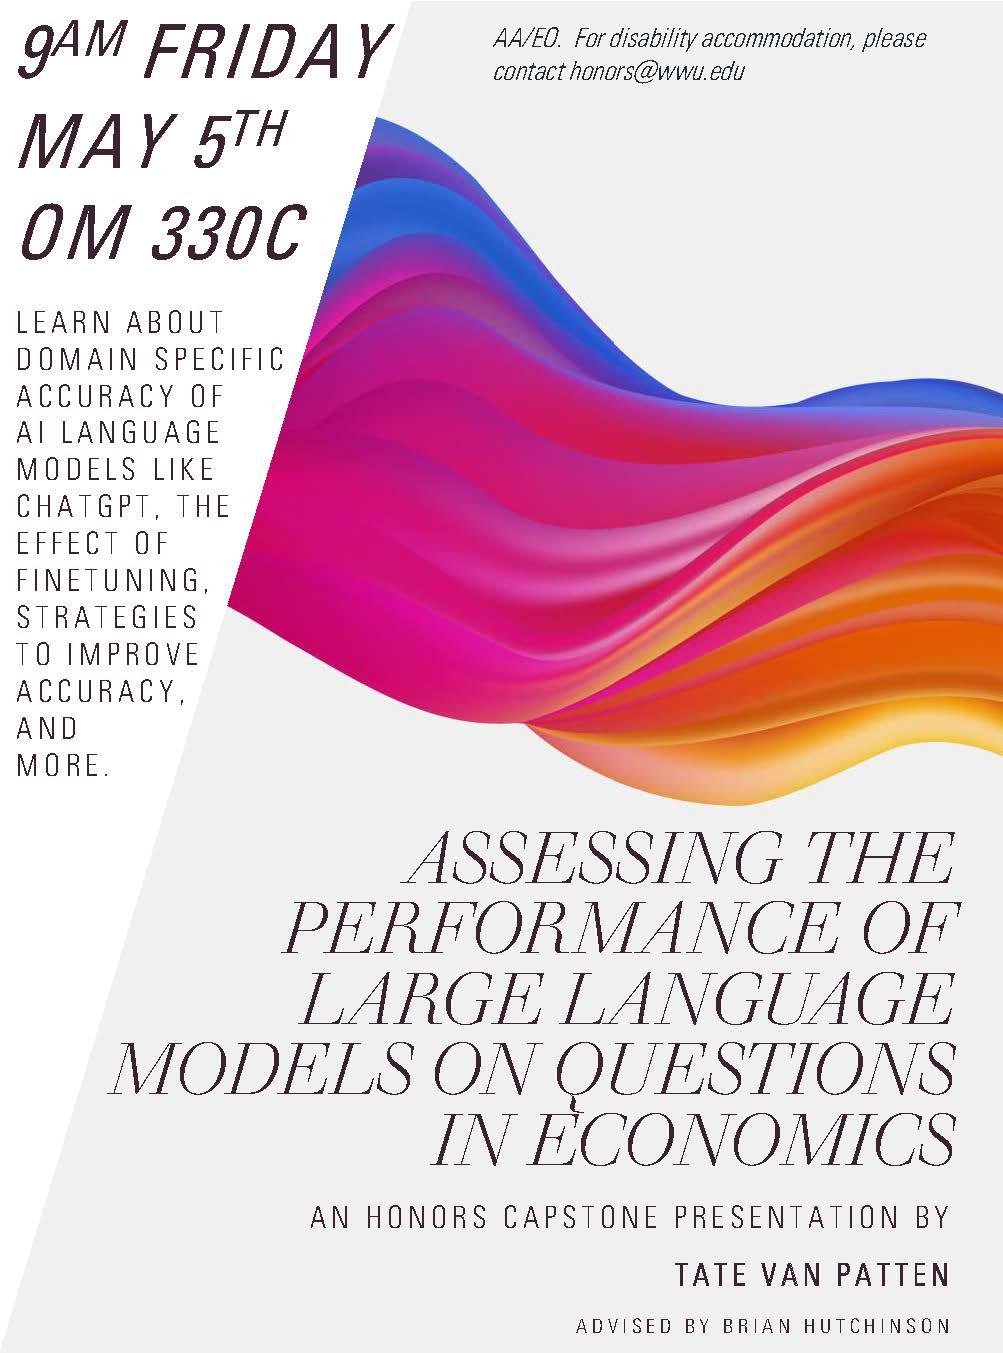 "Assessing the Performance of Large Language Models on questions in economics". subtitle is 'An Honors Capstone Presentation by Tate Van Patten advised by Brian Hutchinson. The sidebar gives information on the date and time, stating May 5th, 2023 9AM in Old Main 330C. Sidebar text says "Learn About Domain Specific Accuracy Of AI Language Models Like ChatGPT, The Effect Of Finetuning, Strategies To Improve Accuracy, And More."